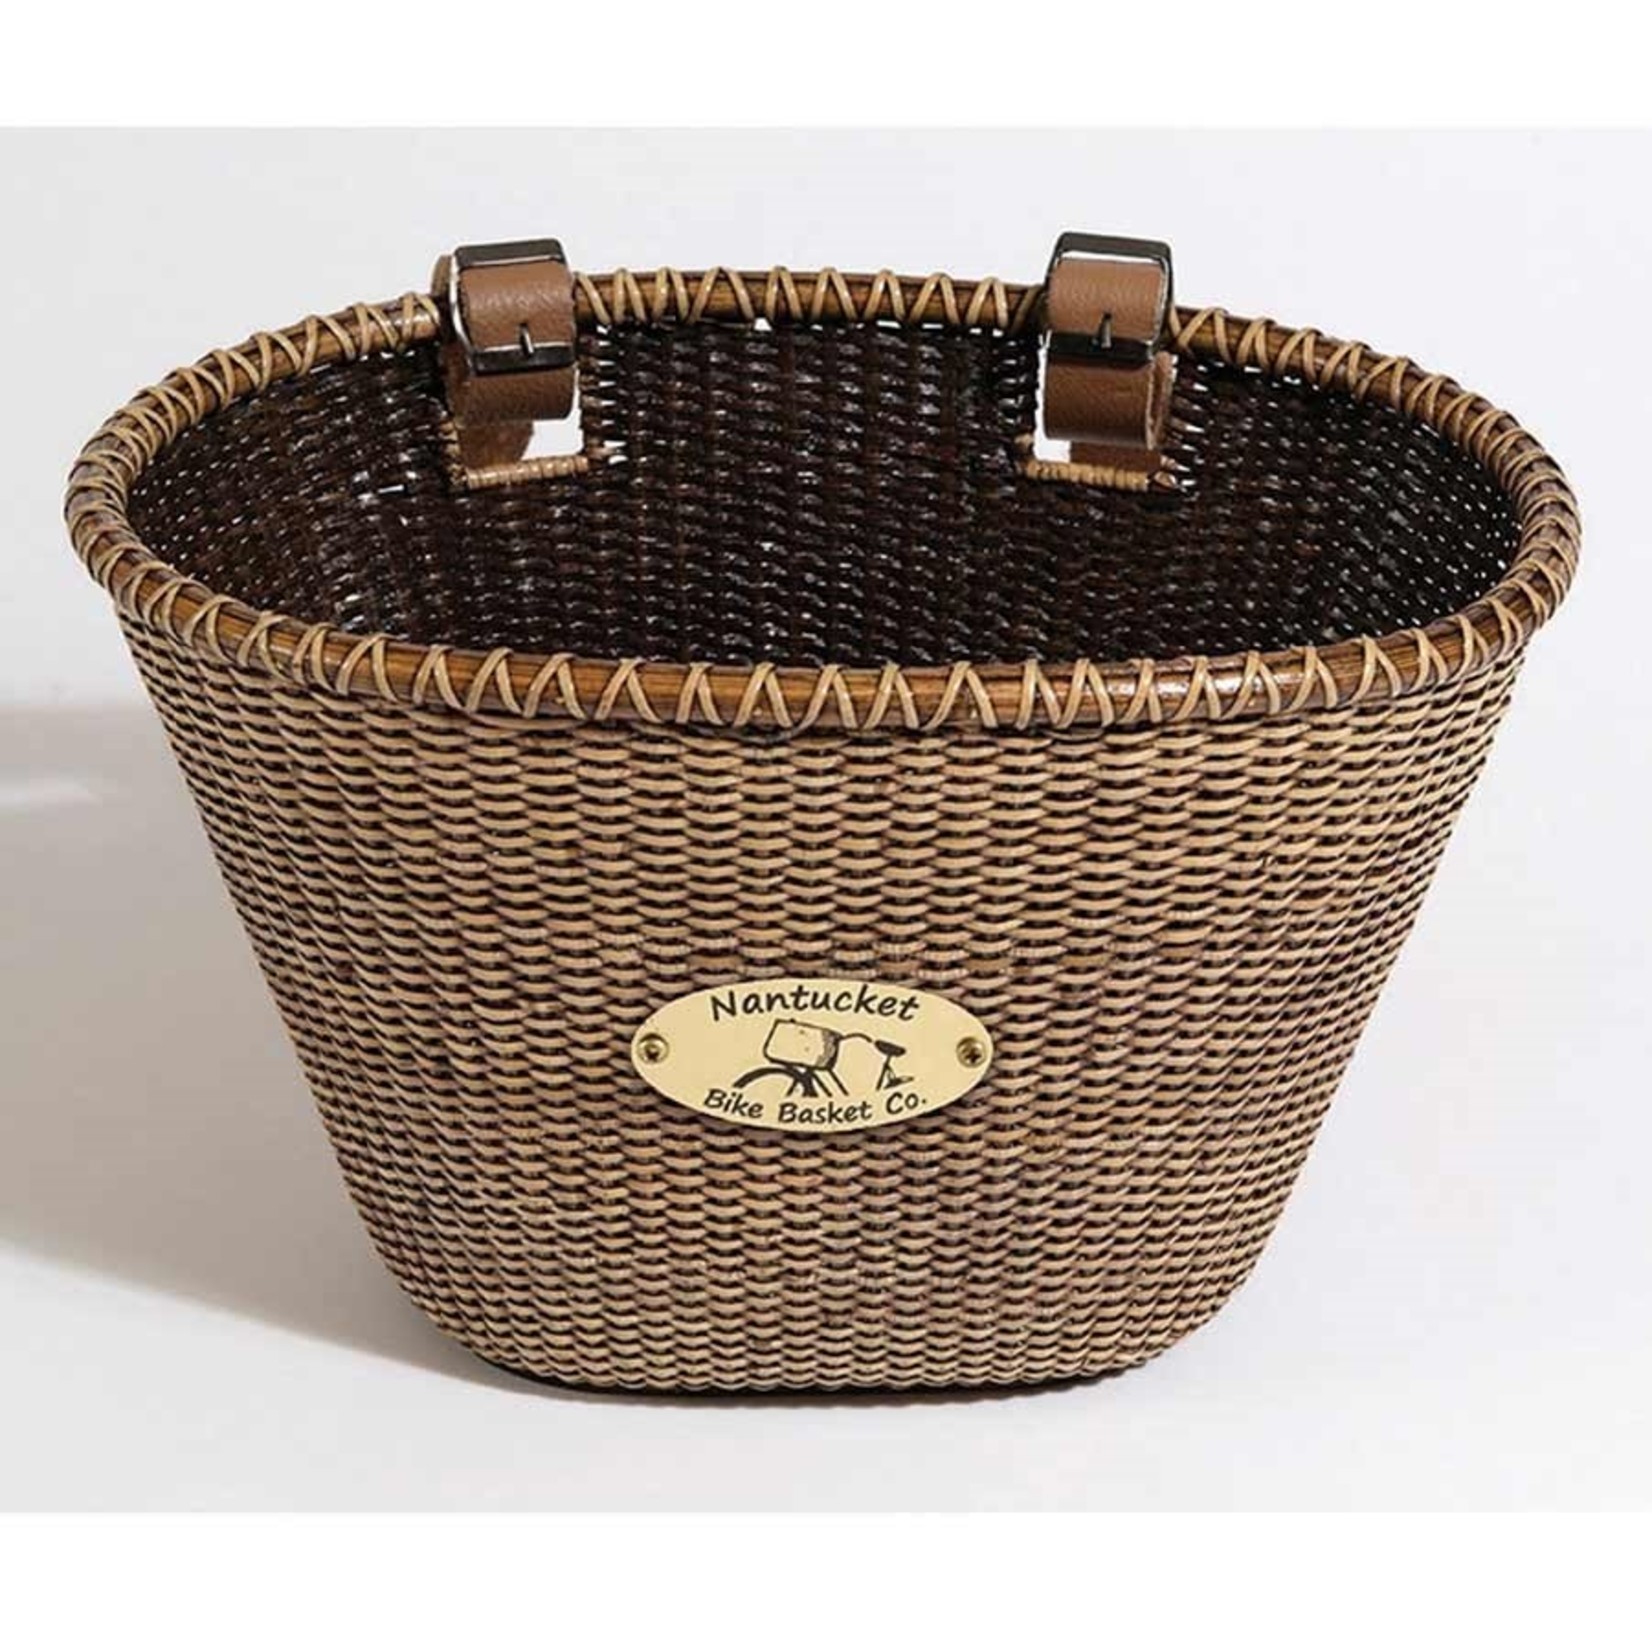 Nantucket Nantucket Ligthship Oval basket 14''x10''x8.5'' Stained